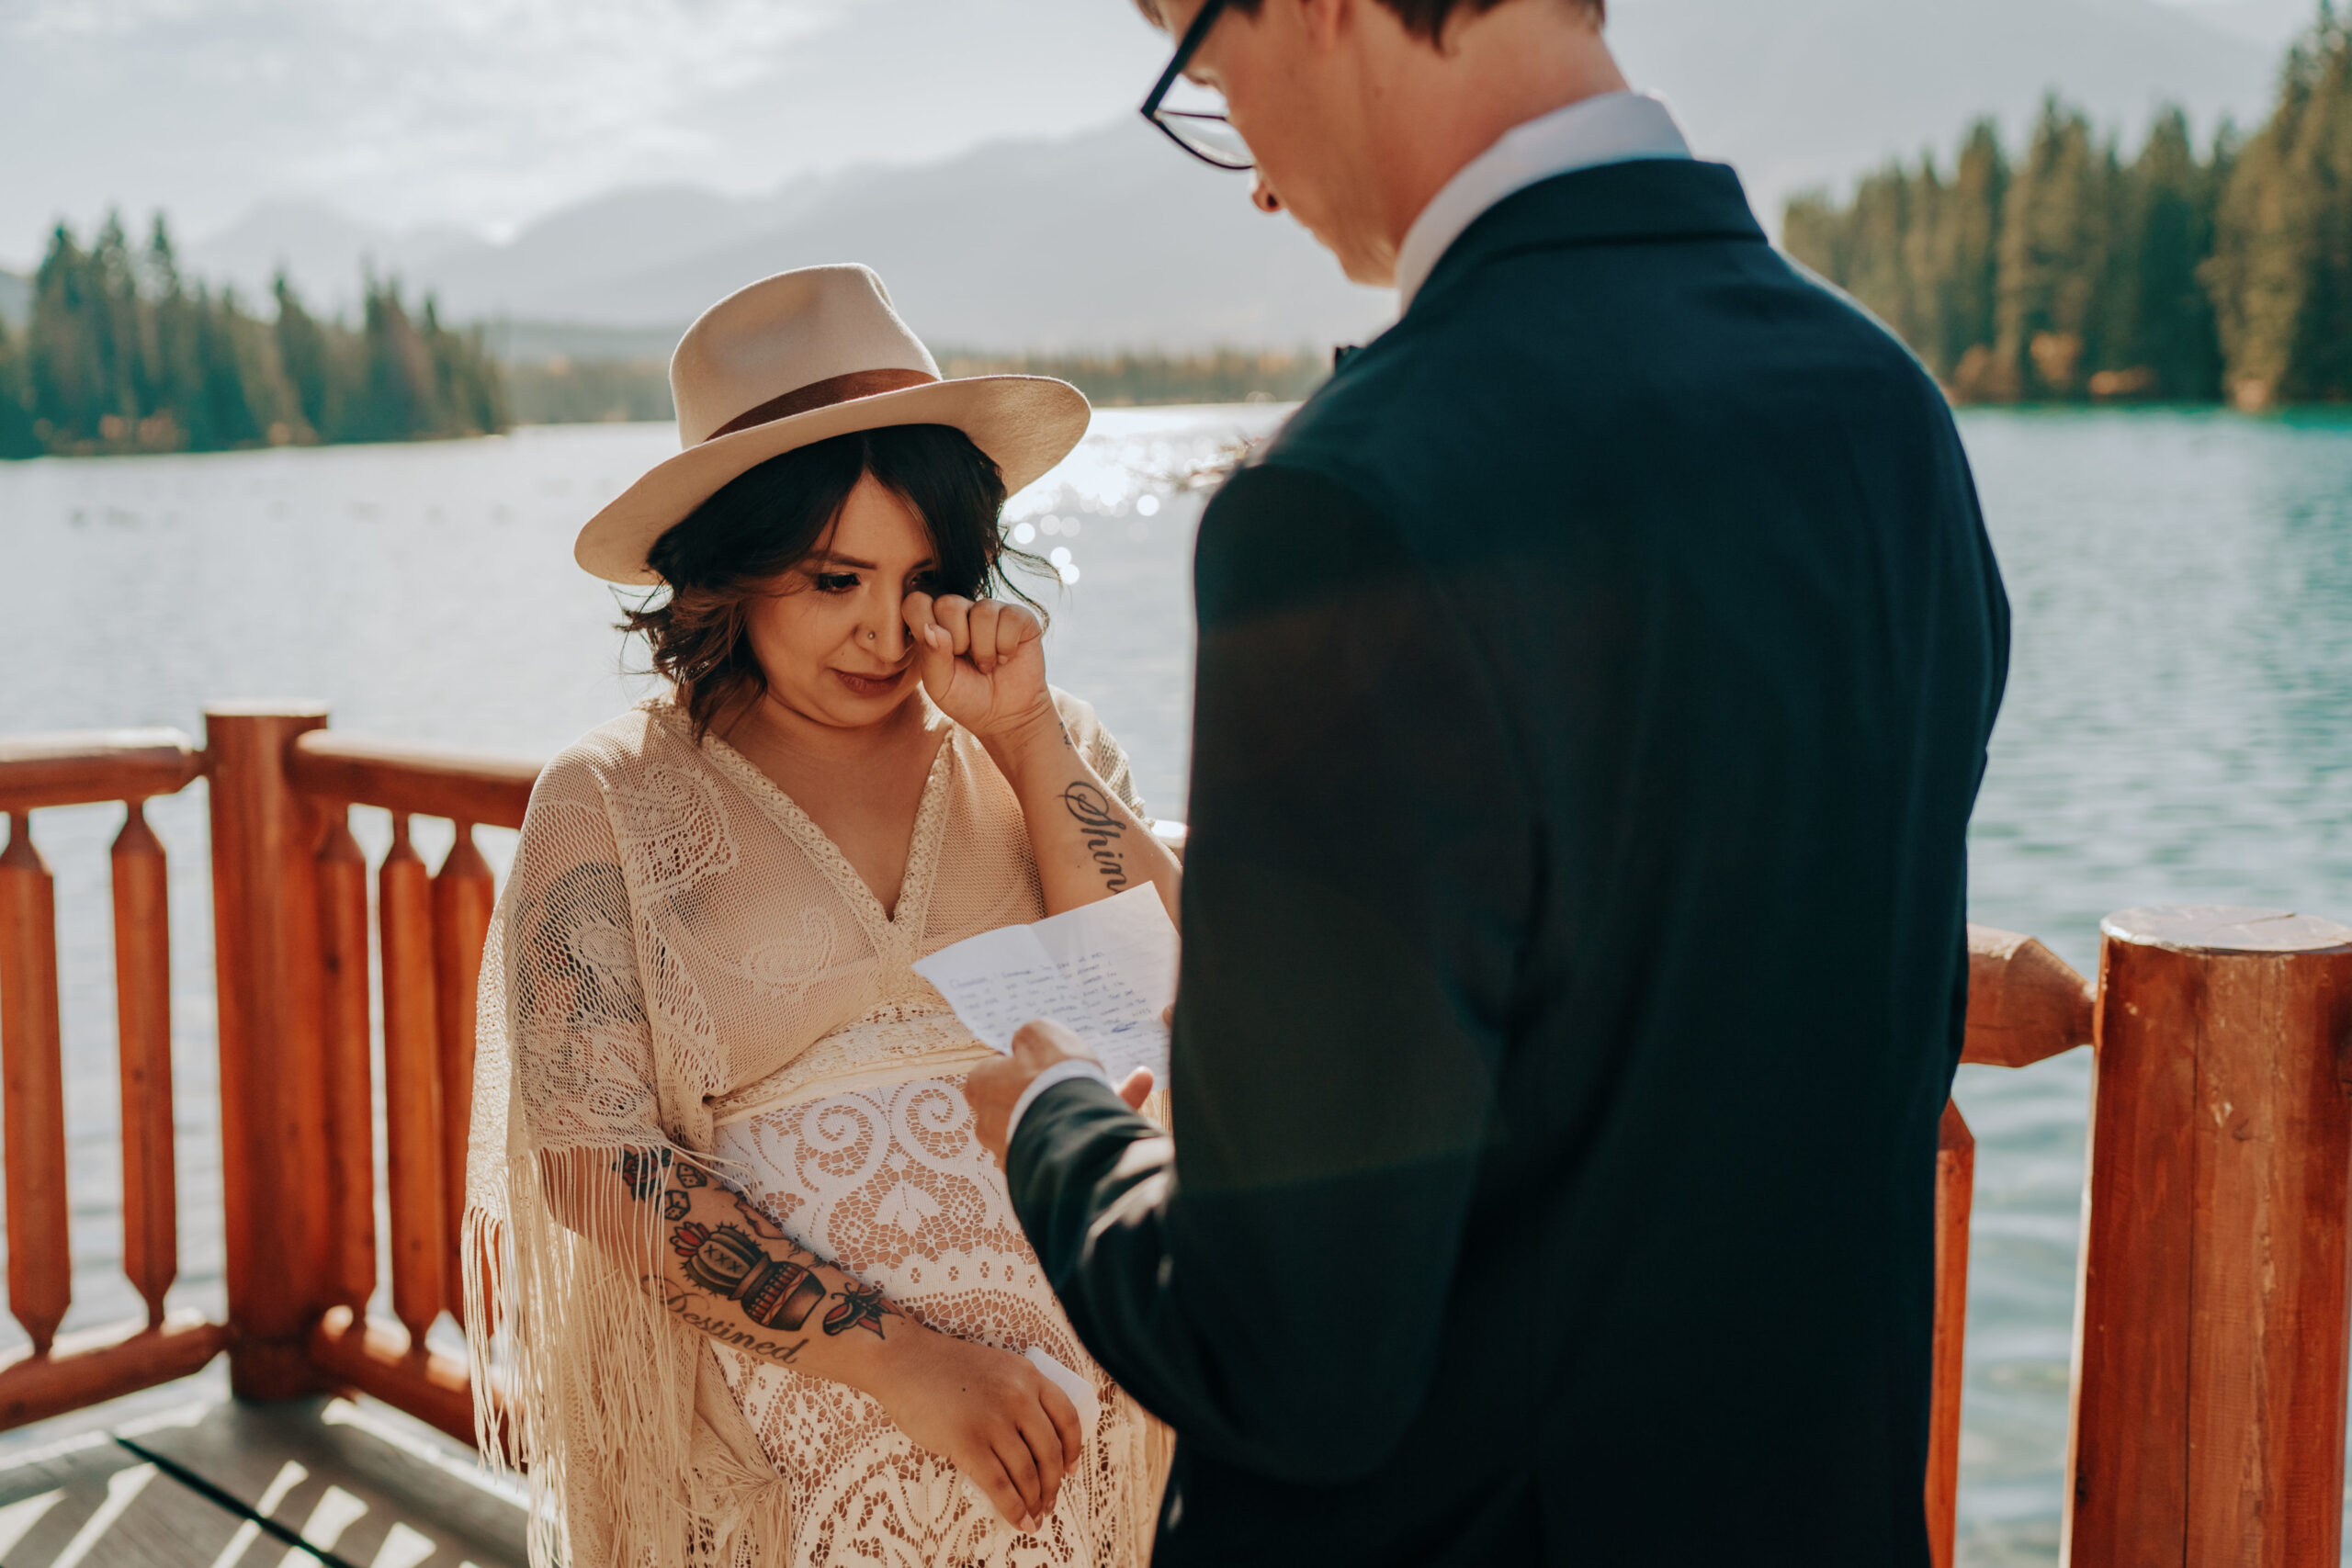 Boho bride in hat saying vows on deck overlooking lake